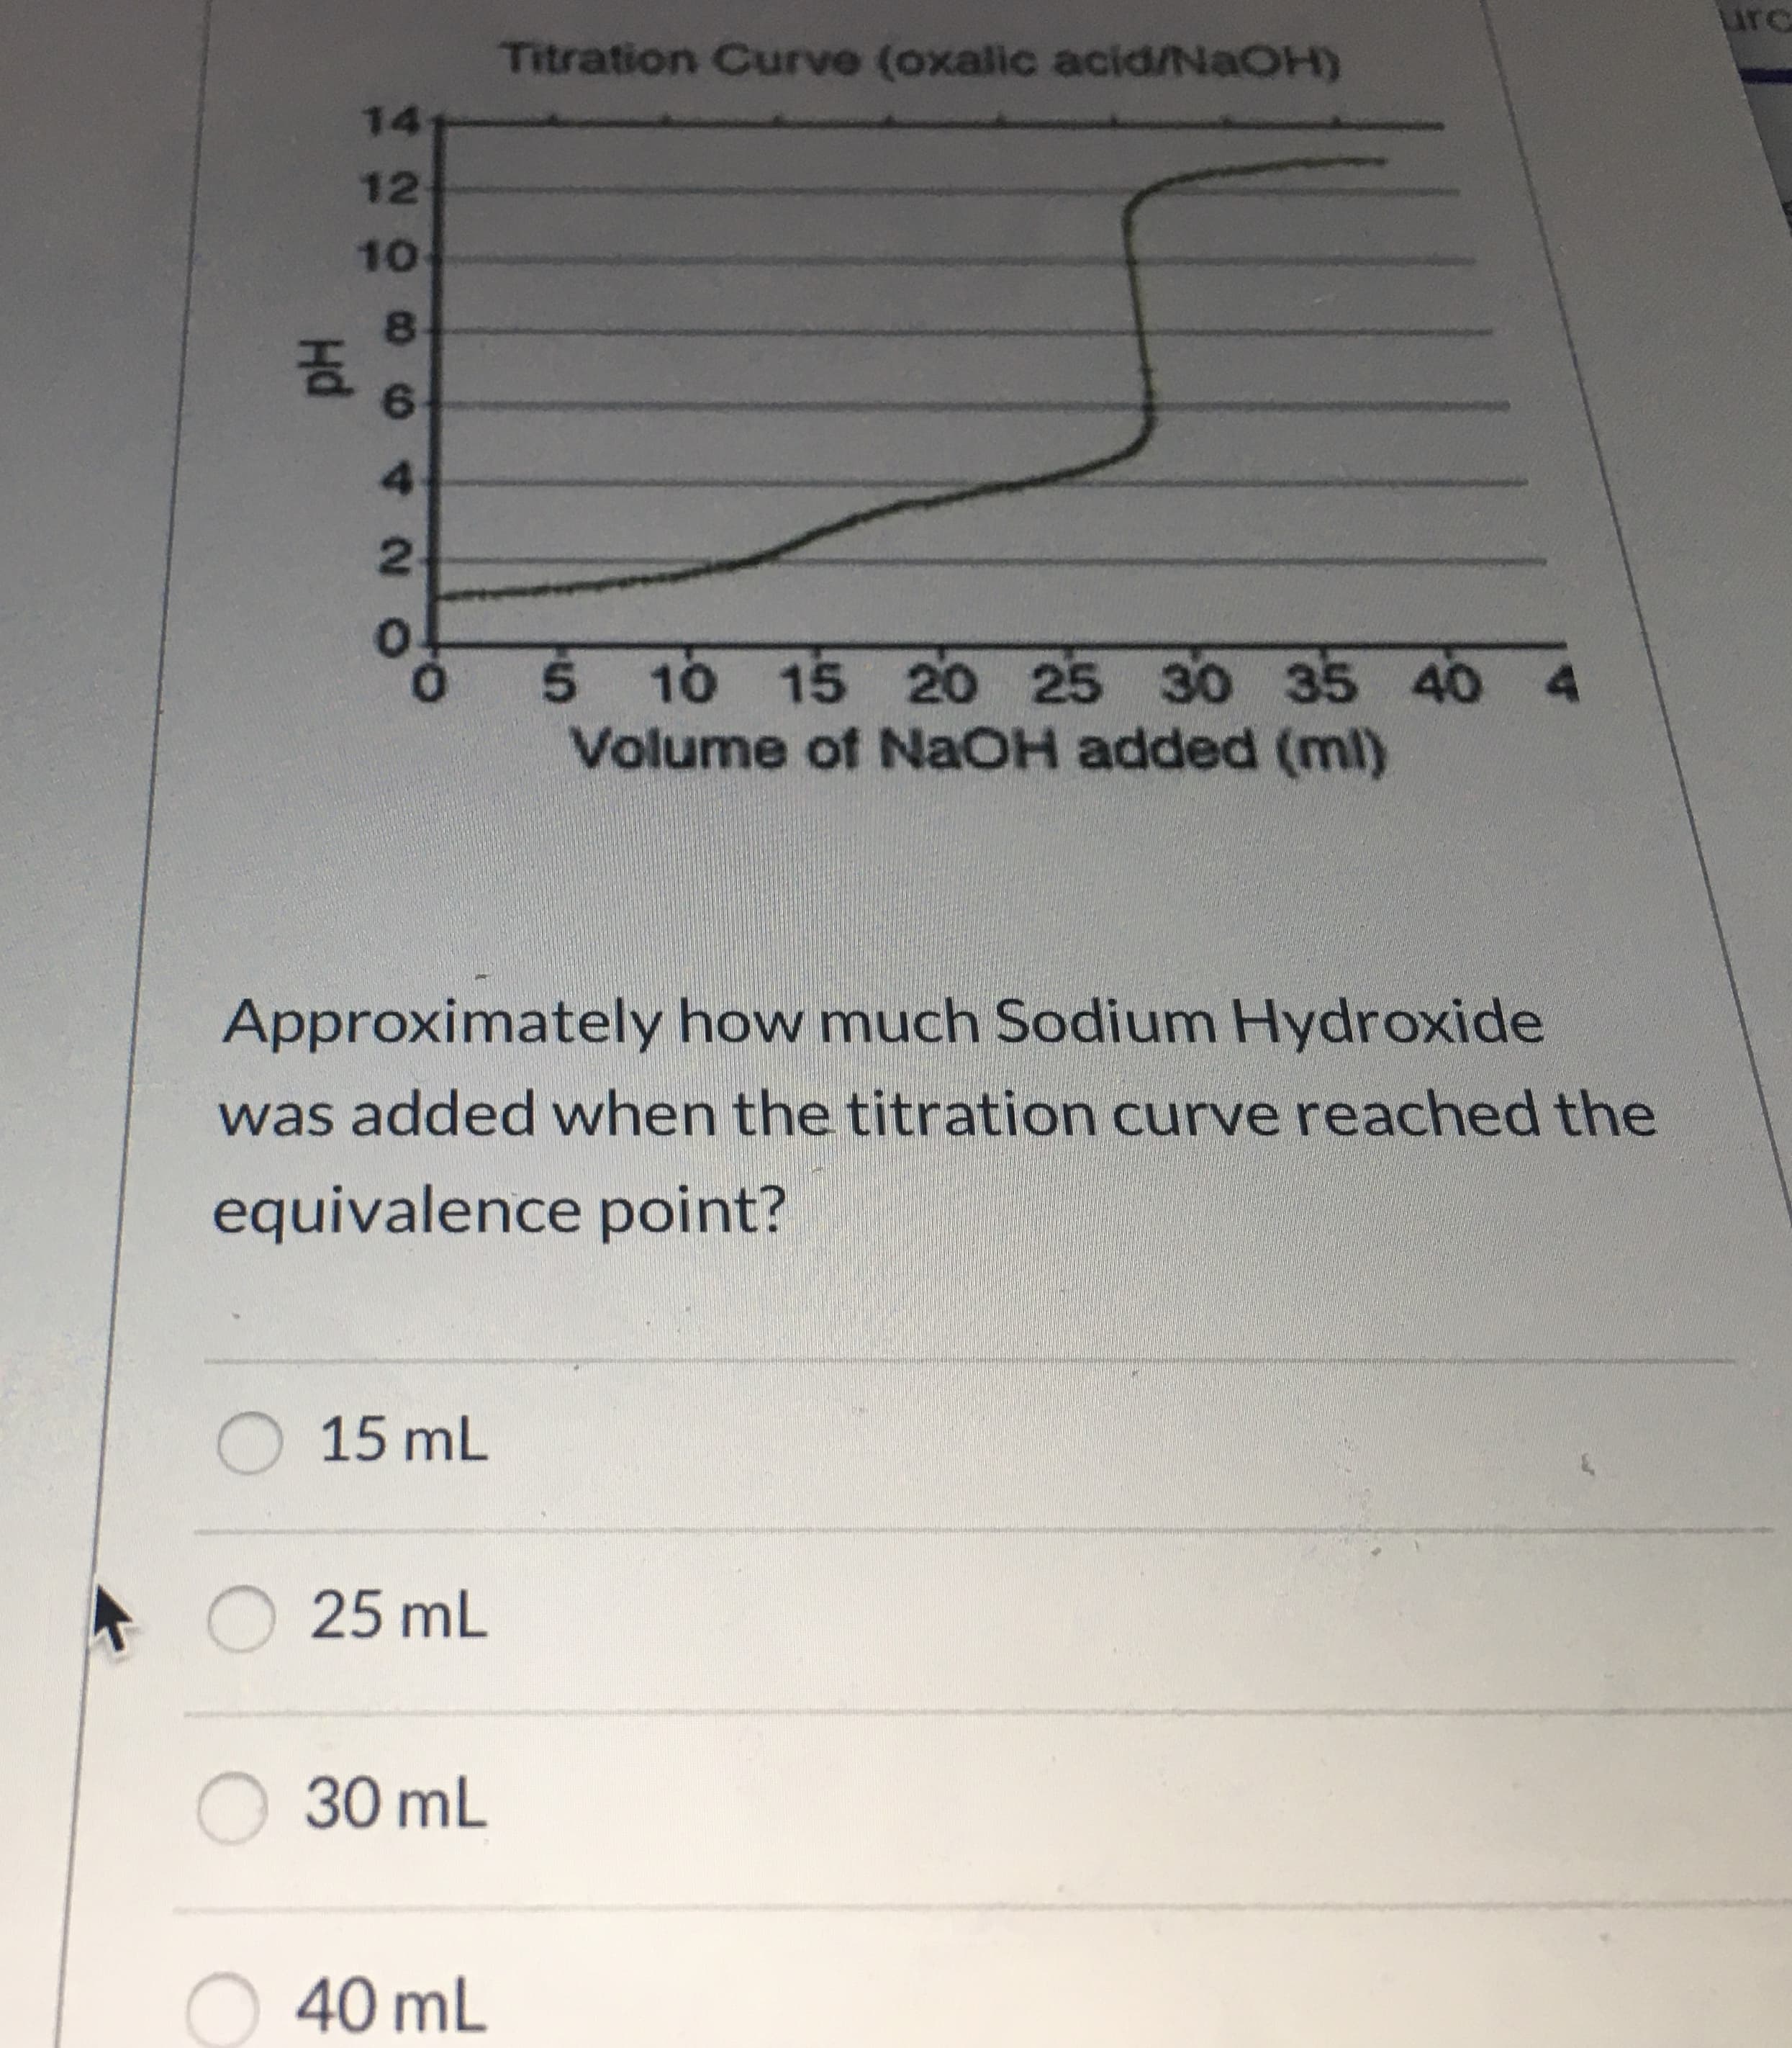 Approximately how much Sodium Hydroxide
was added when the titration curve reached the
equivalence point?
